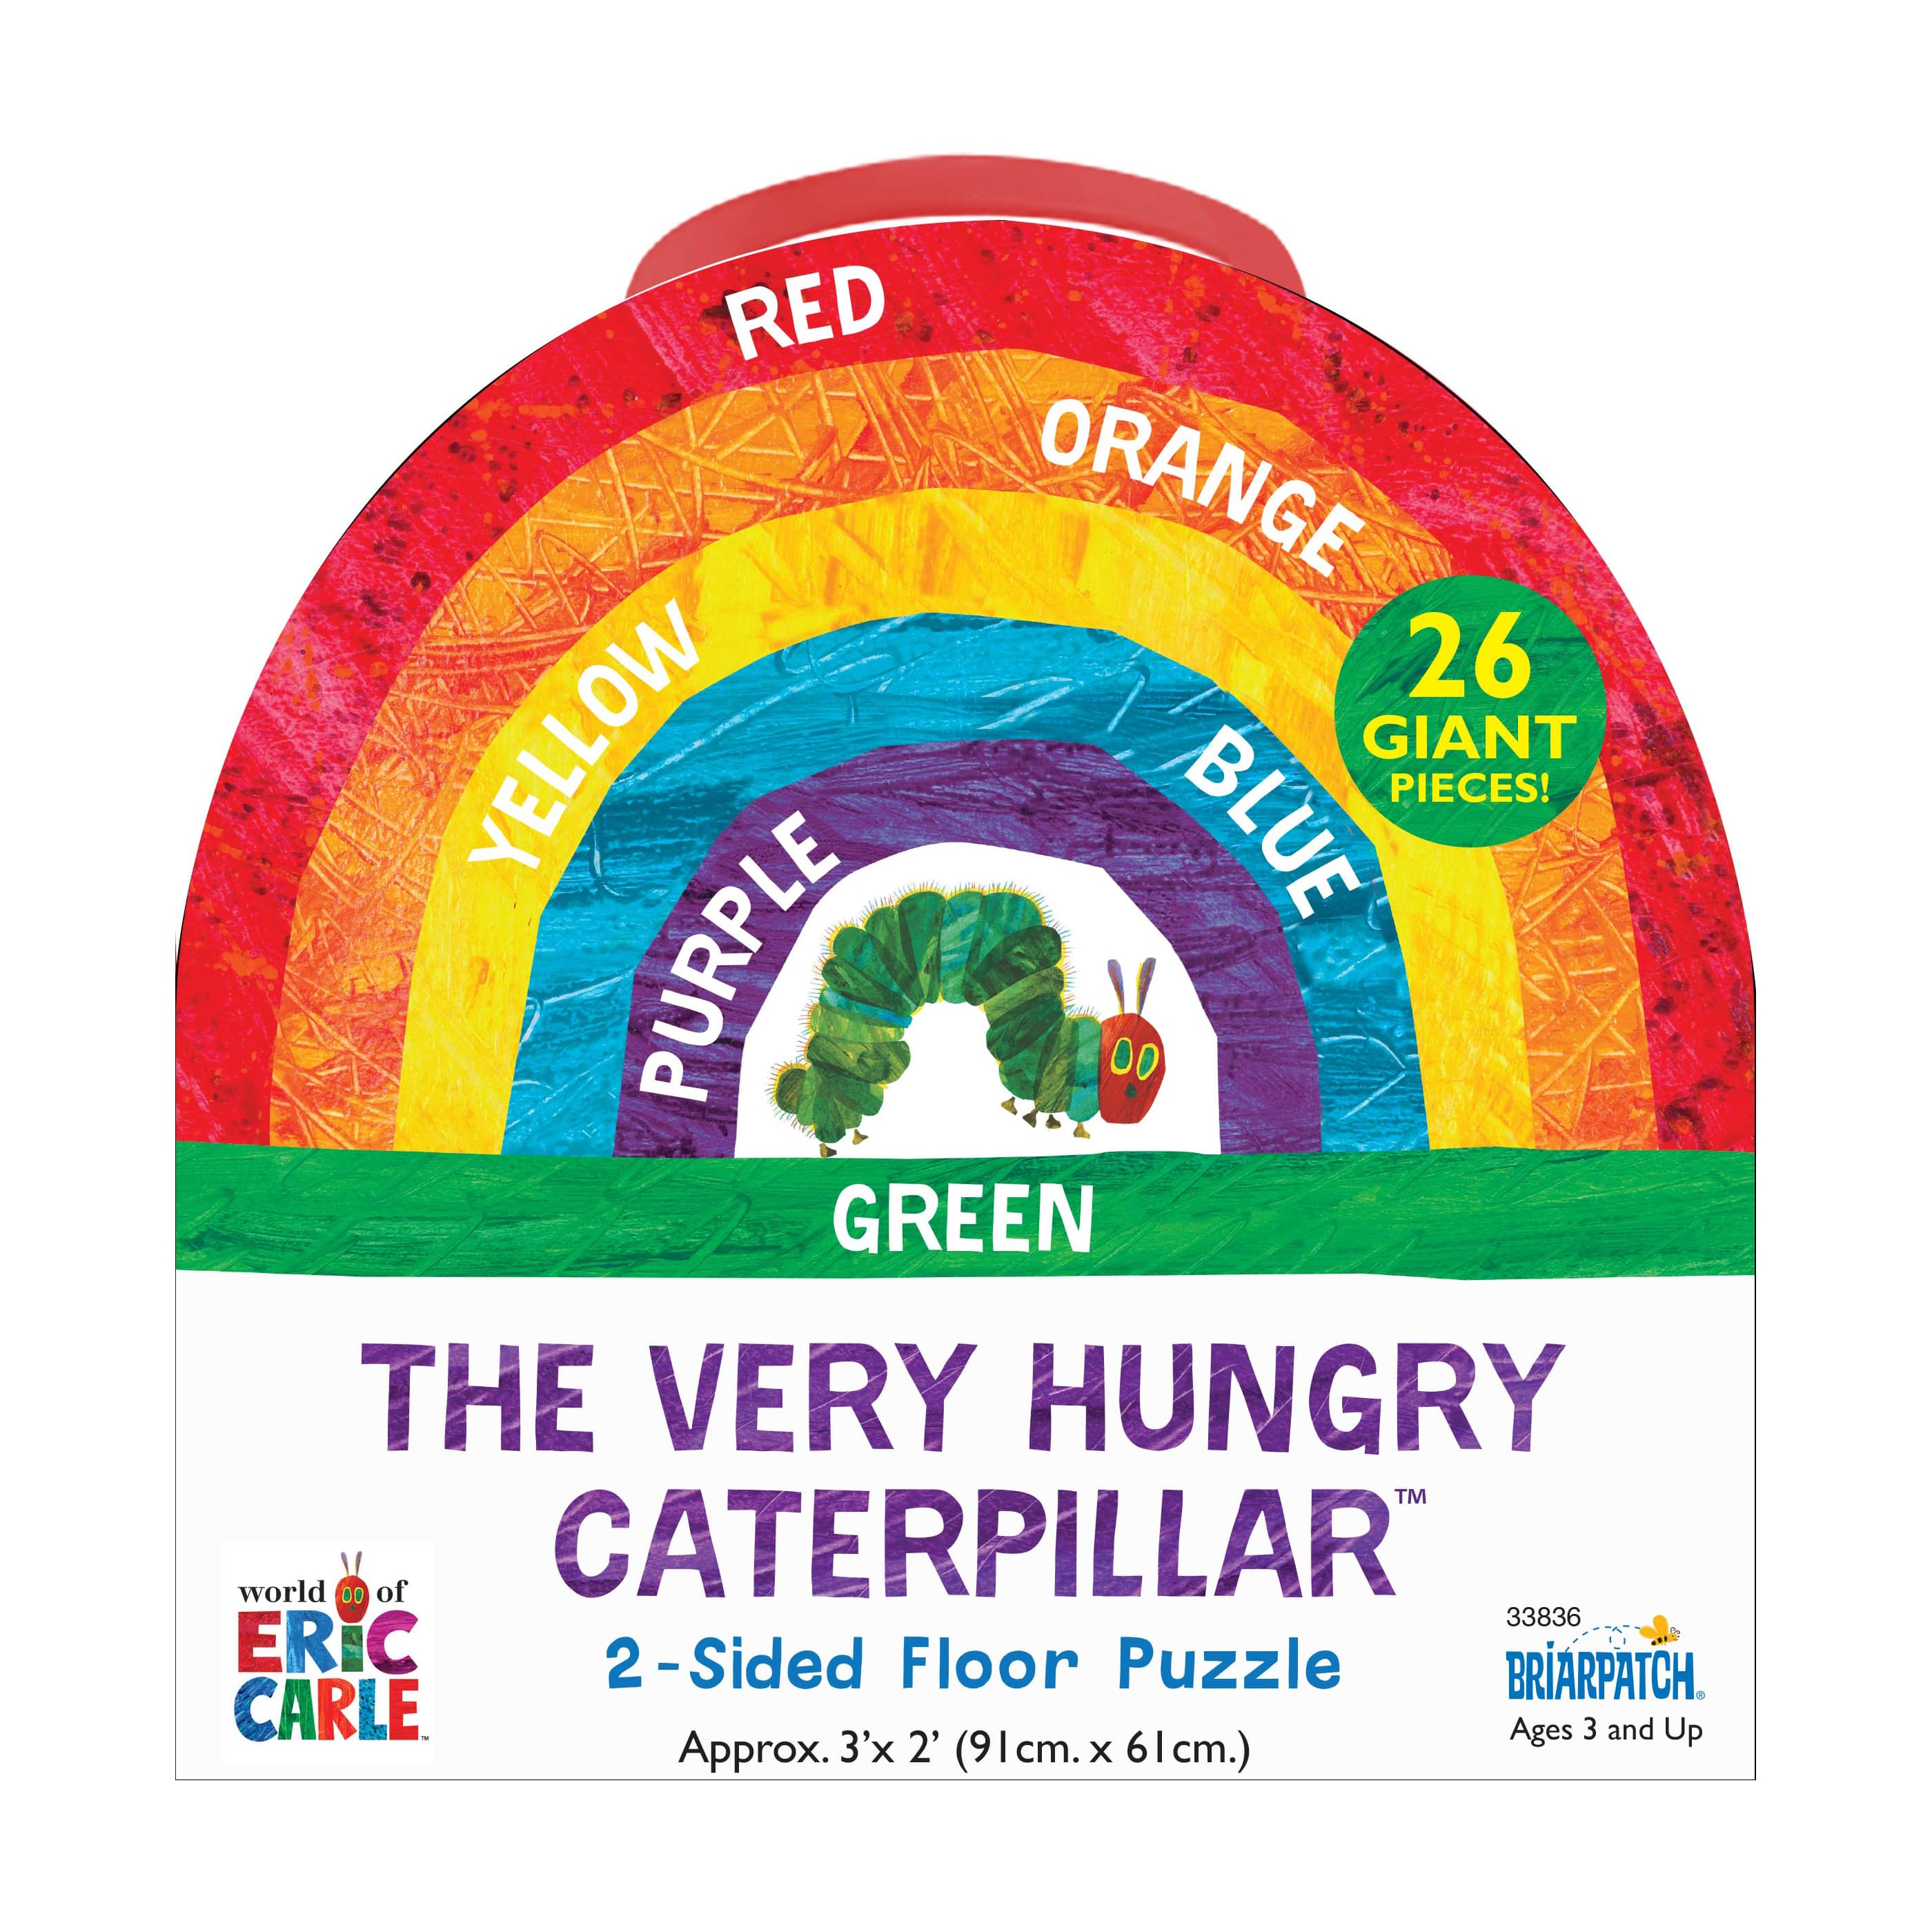 The Very Hungry Caterpillar 26 Piece 2-Sided Floor Puzzle